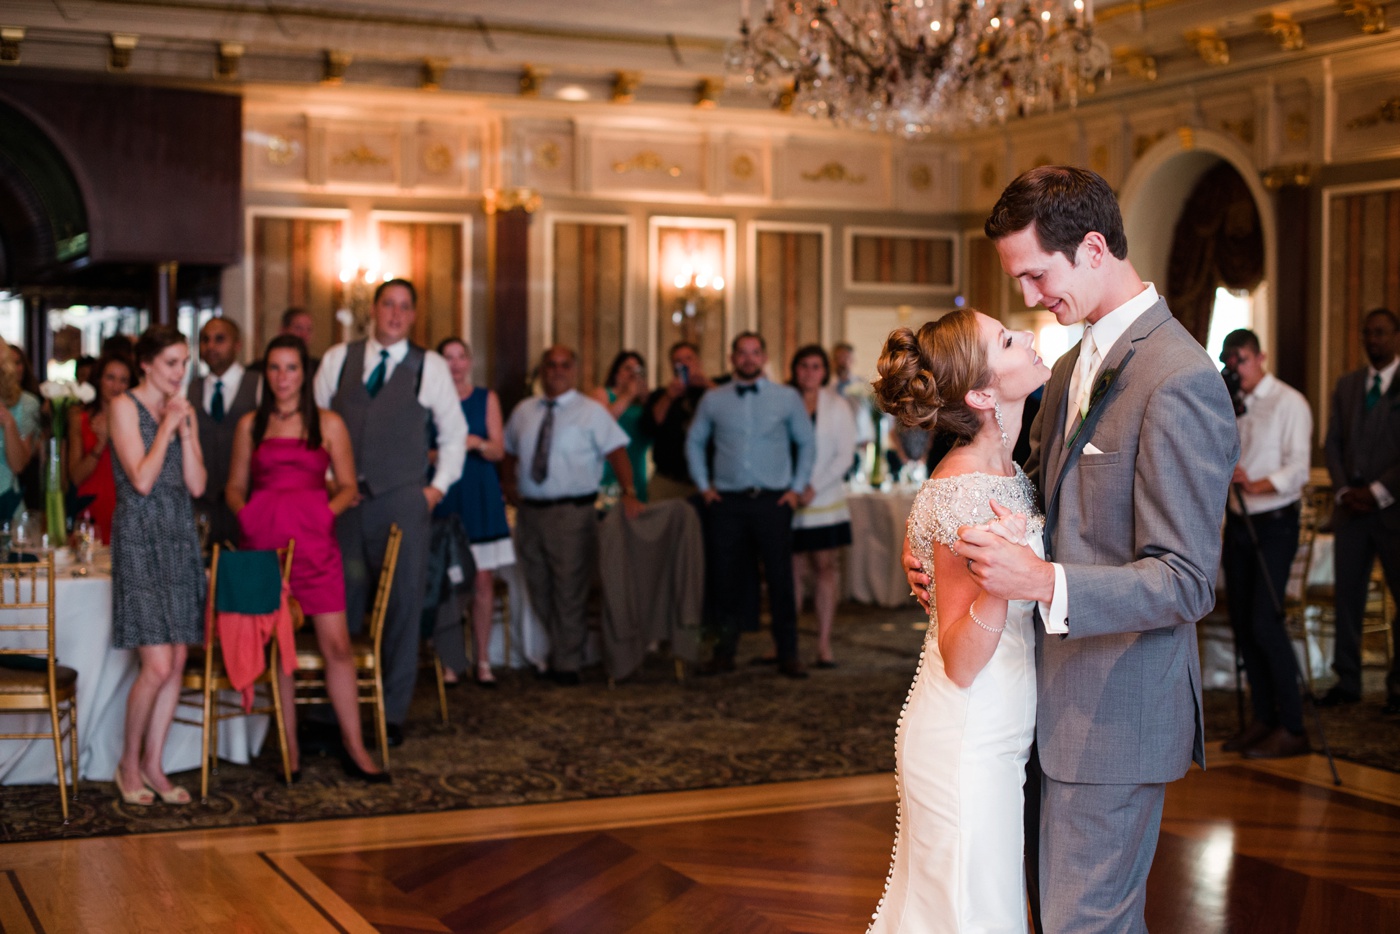 91 - The Brownstone House Wedding Reception - Paterson New Jersey Wedding Photographer - Alison Dunn Photography photo